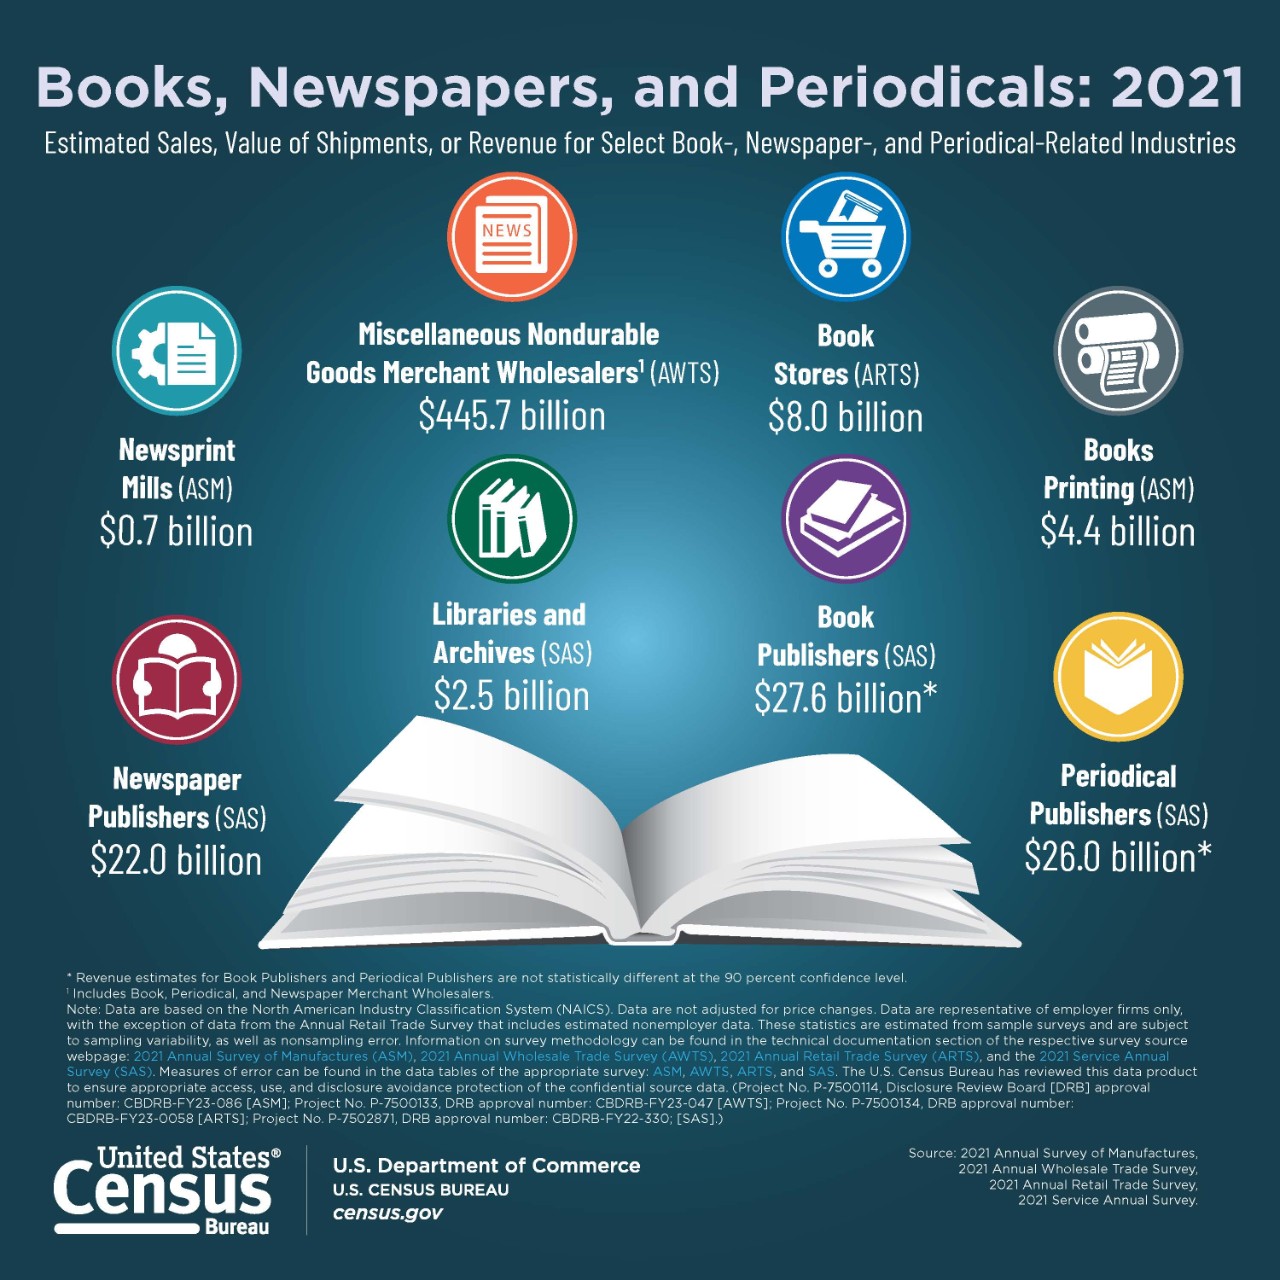 Books, Newspapers, and Periodicals: 2021